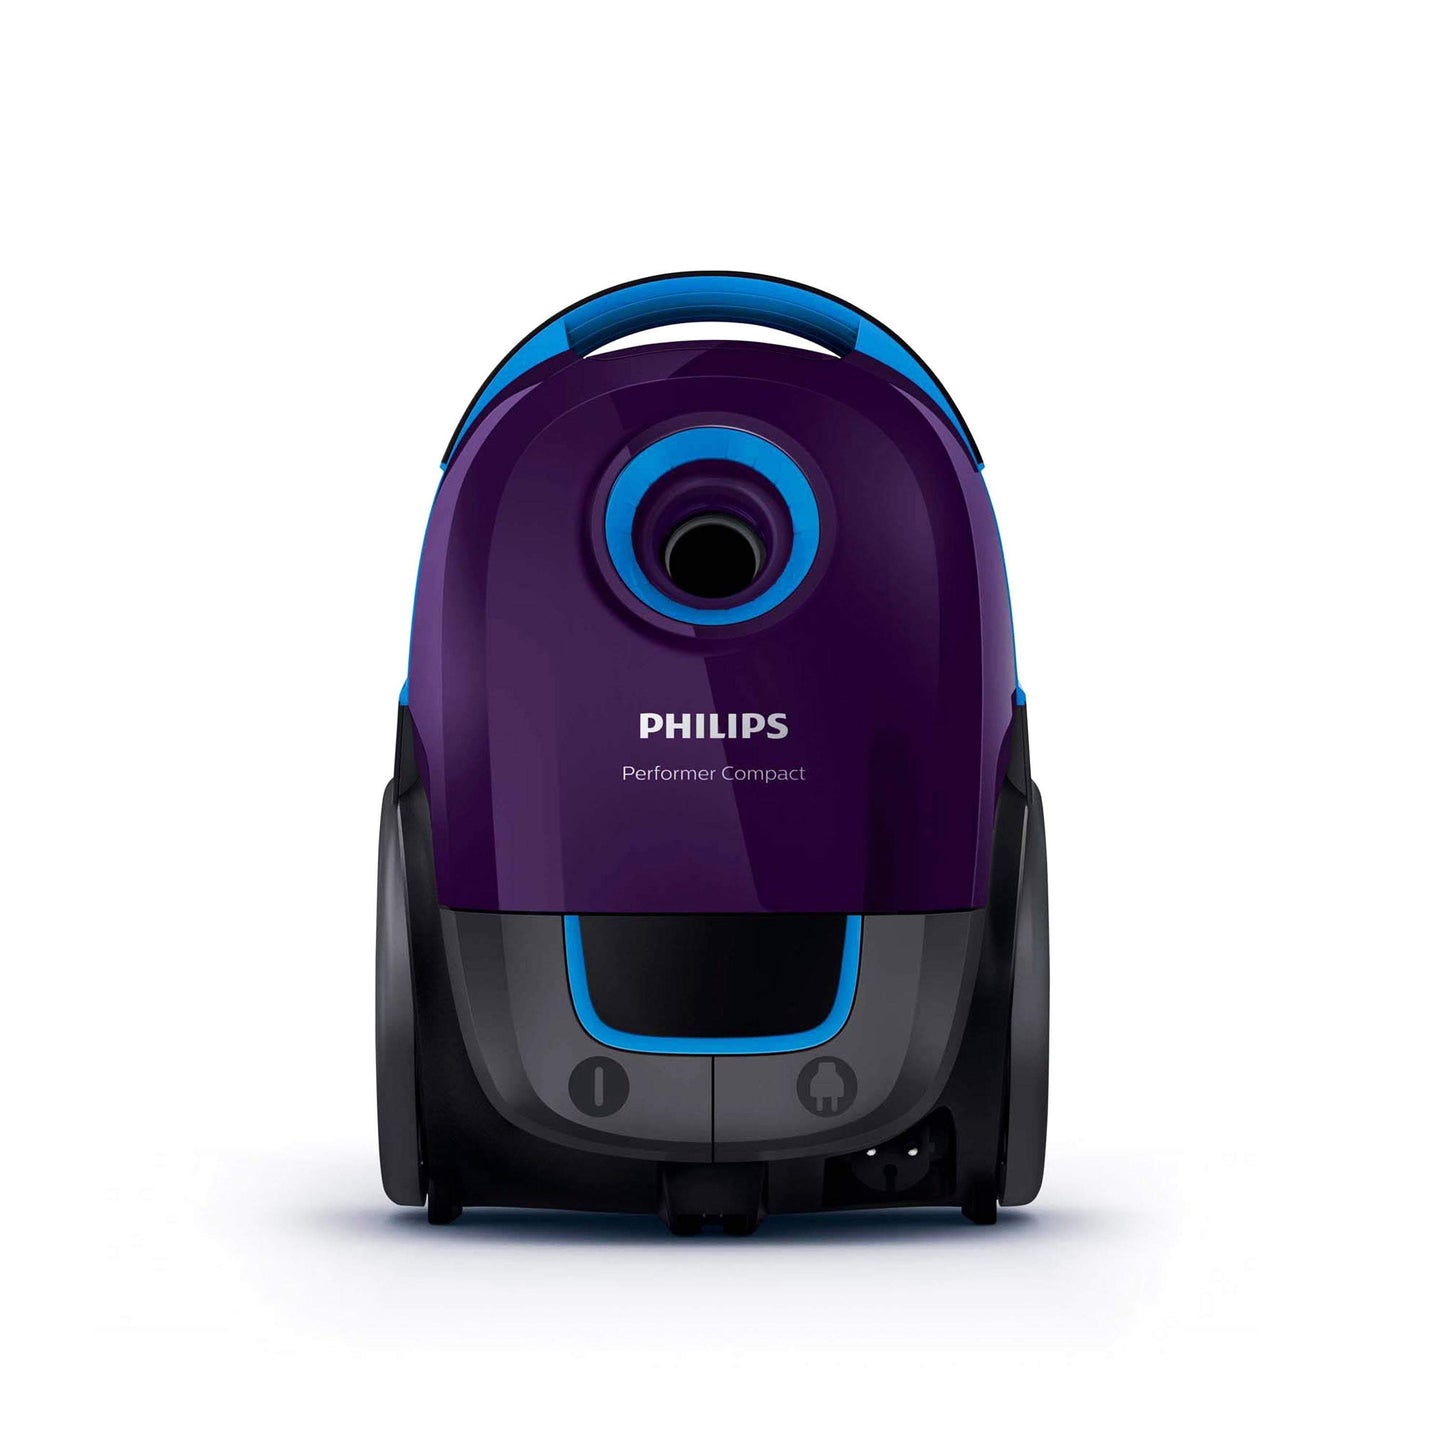 Philips Performer Compact Vacuum cleaner with bag-Royal Brands Co-